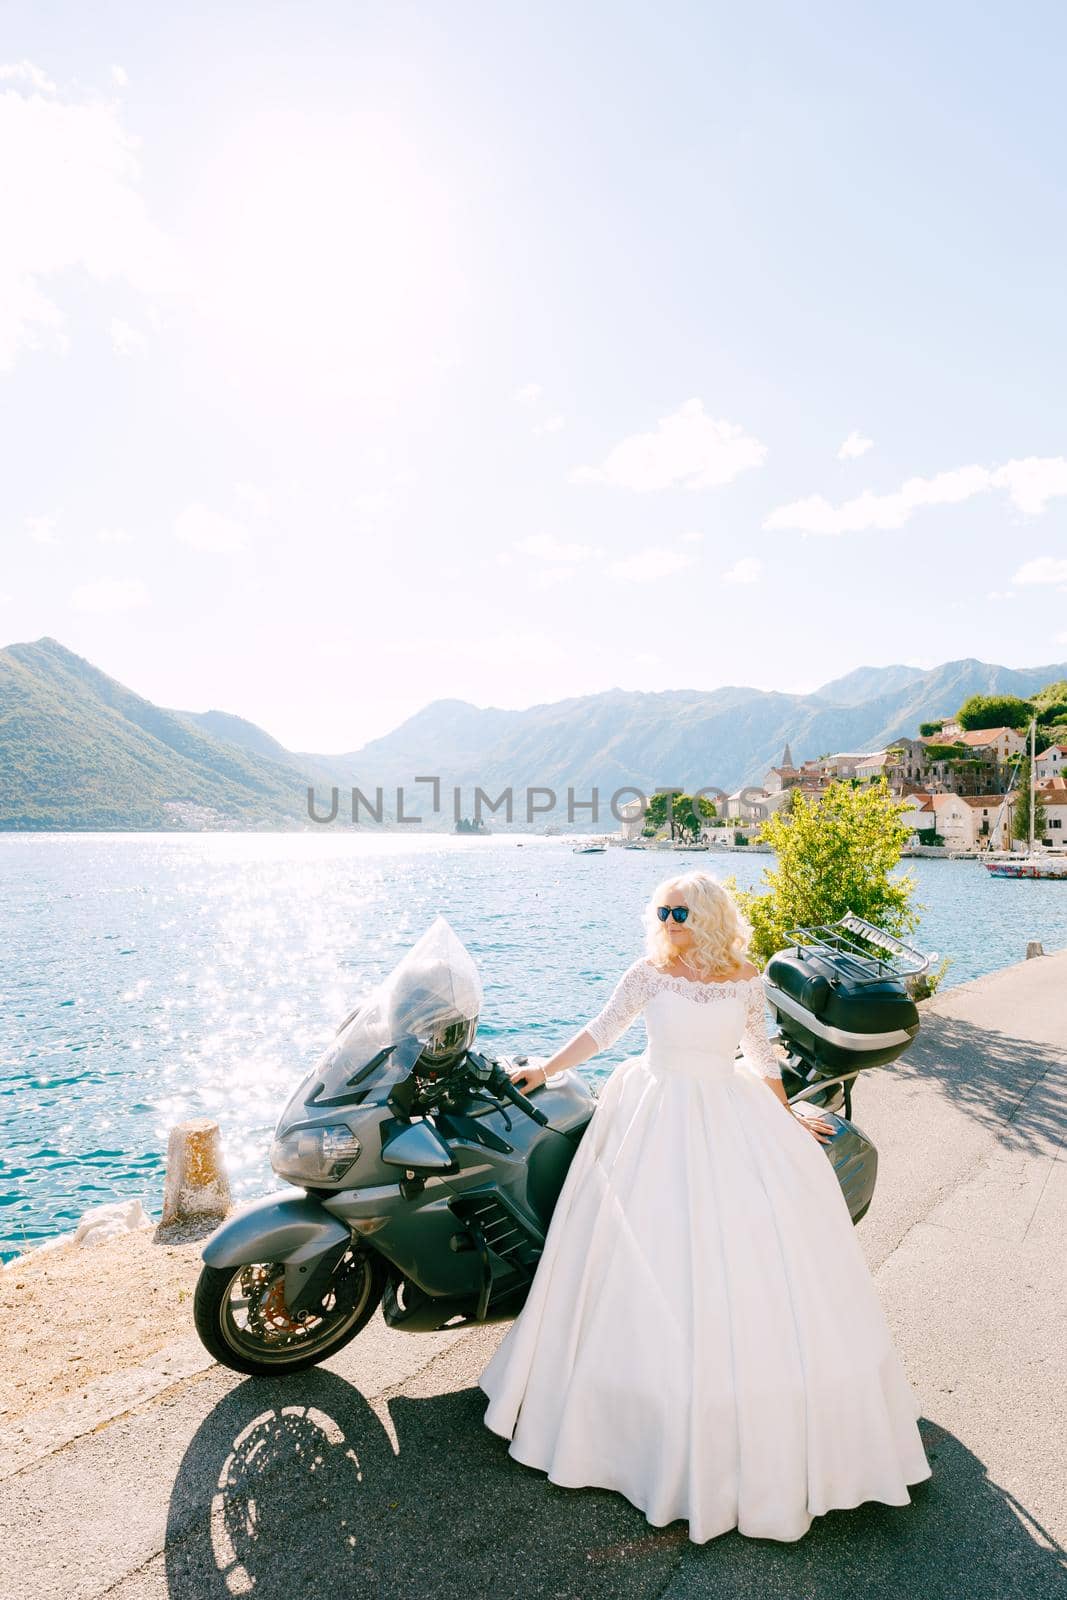 A bride in sunglasses and a wedding dress stands near a motorcycle on the pier in the old town of Perast . High quality photo